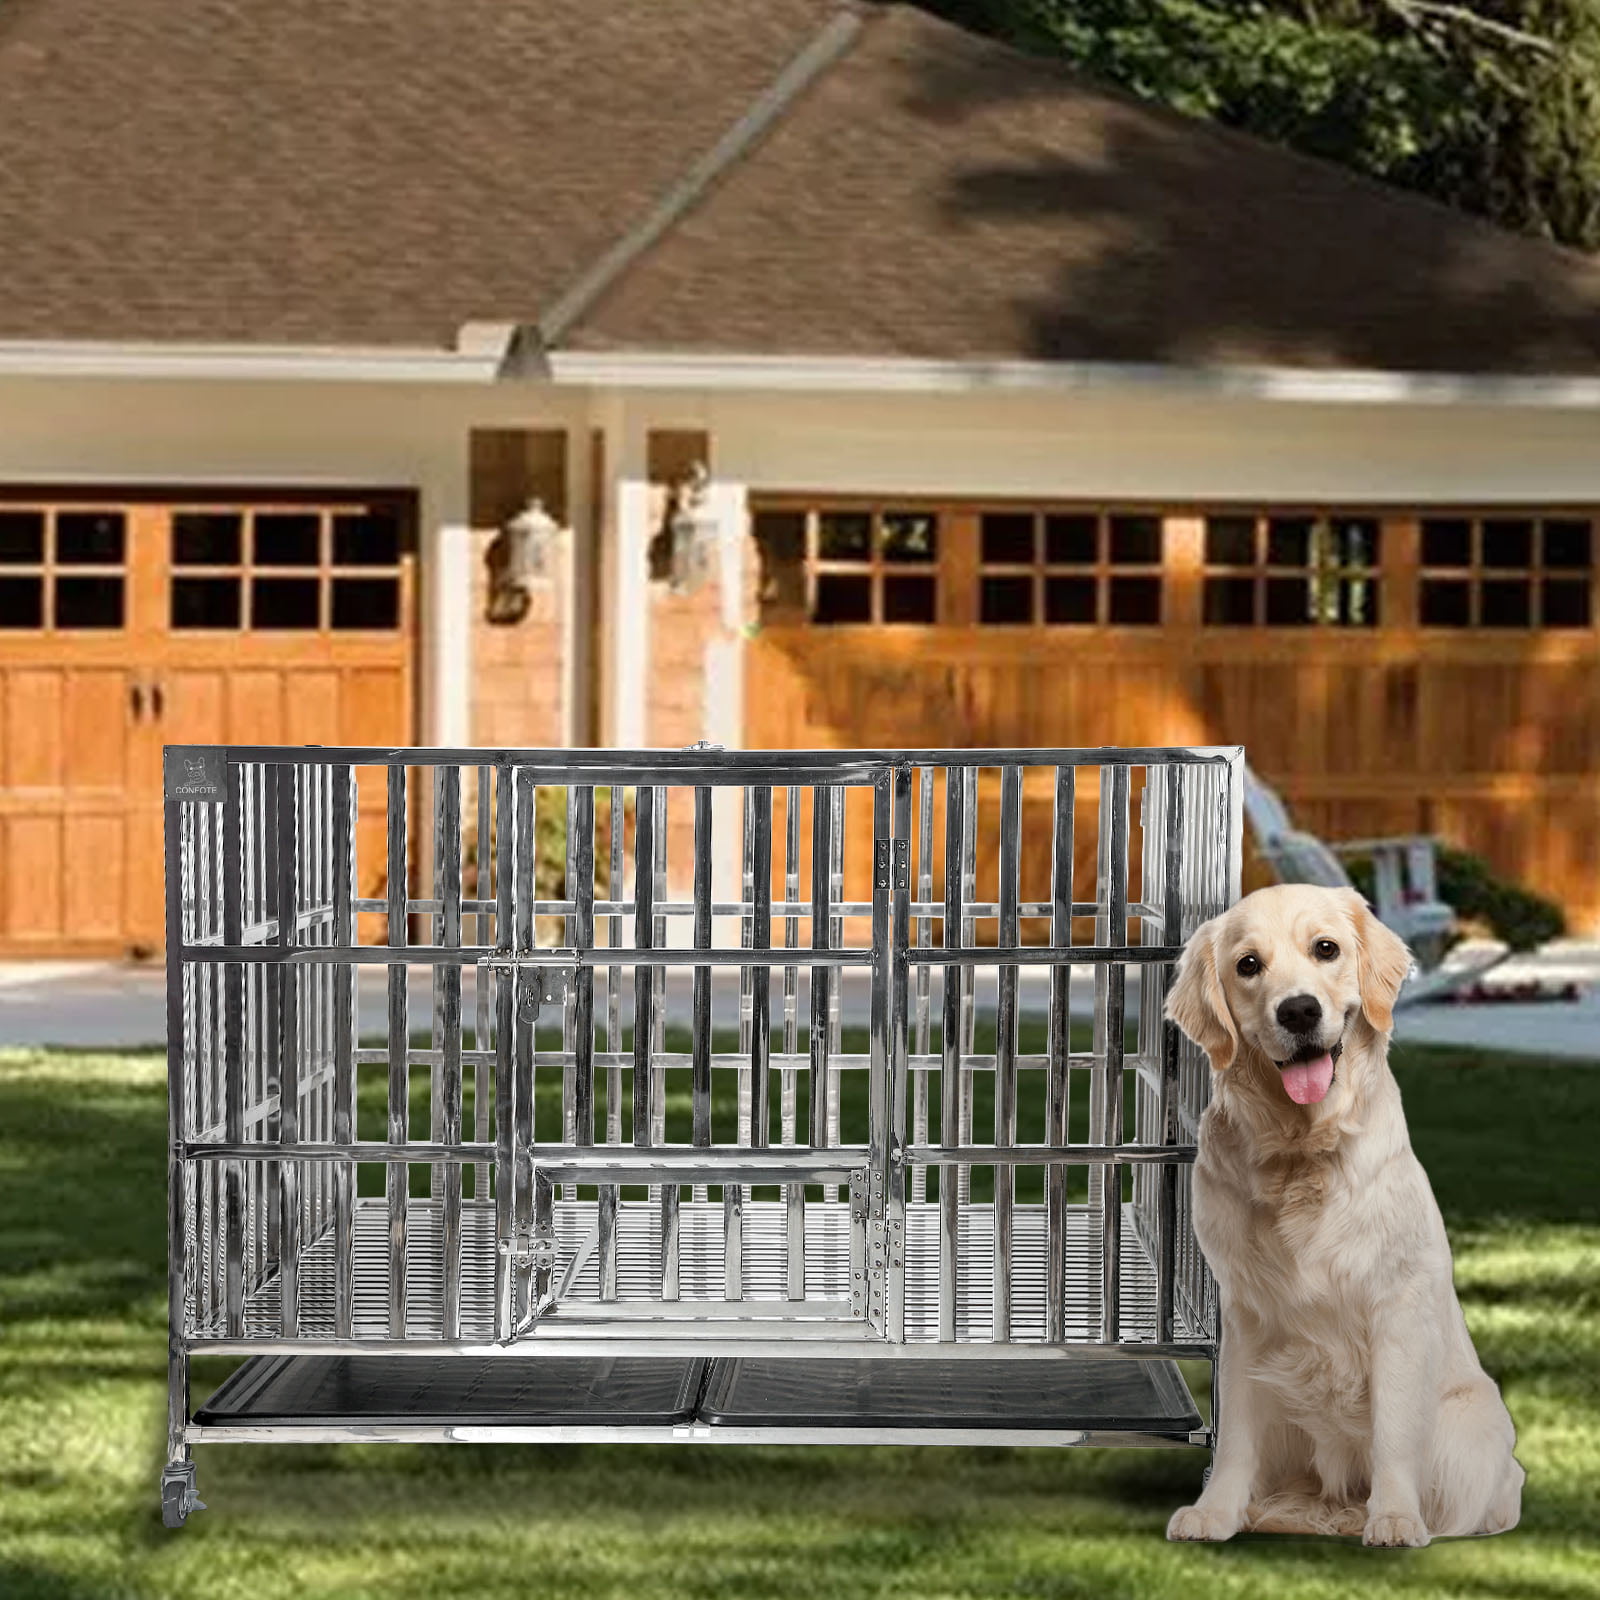 Confote Heavy Duty Stainless Steel & Metal Dog Cage Kennel Crate and Playpen for Training Small/Medium/Large Dog Indoor Outdoor with Double Doors & Locks Design Included Lockable Wheels Removable Tray 